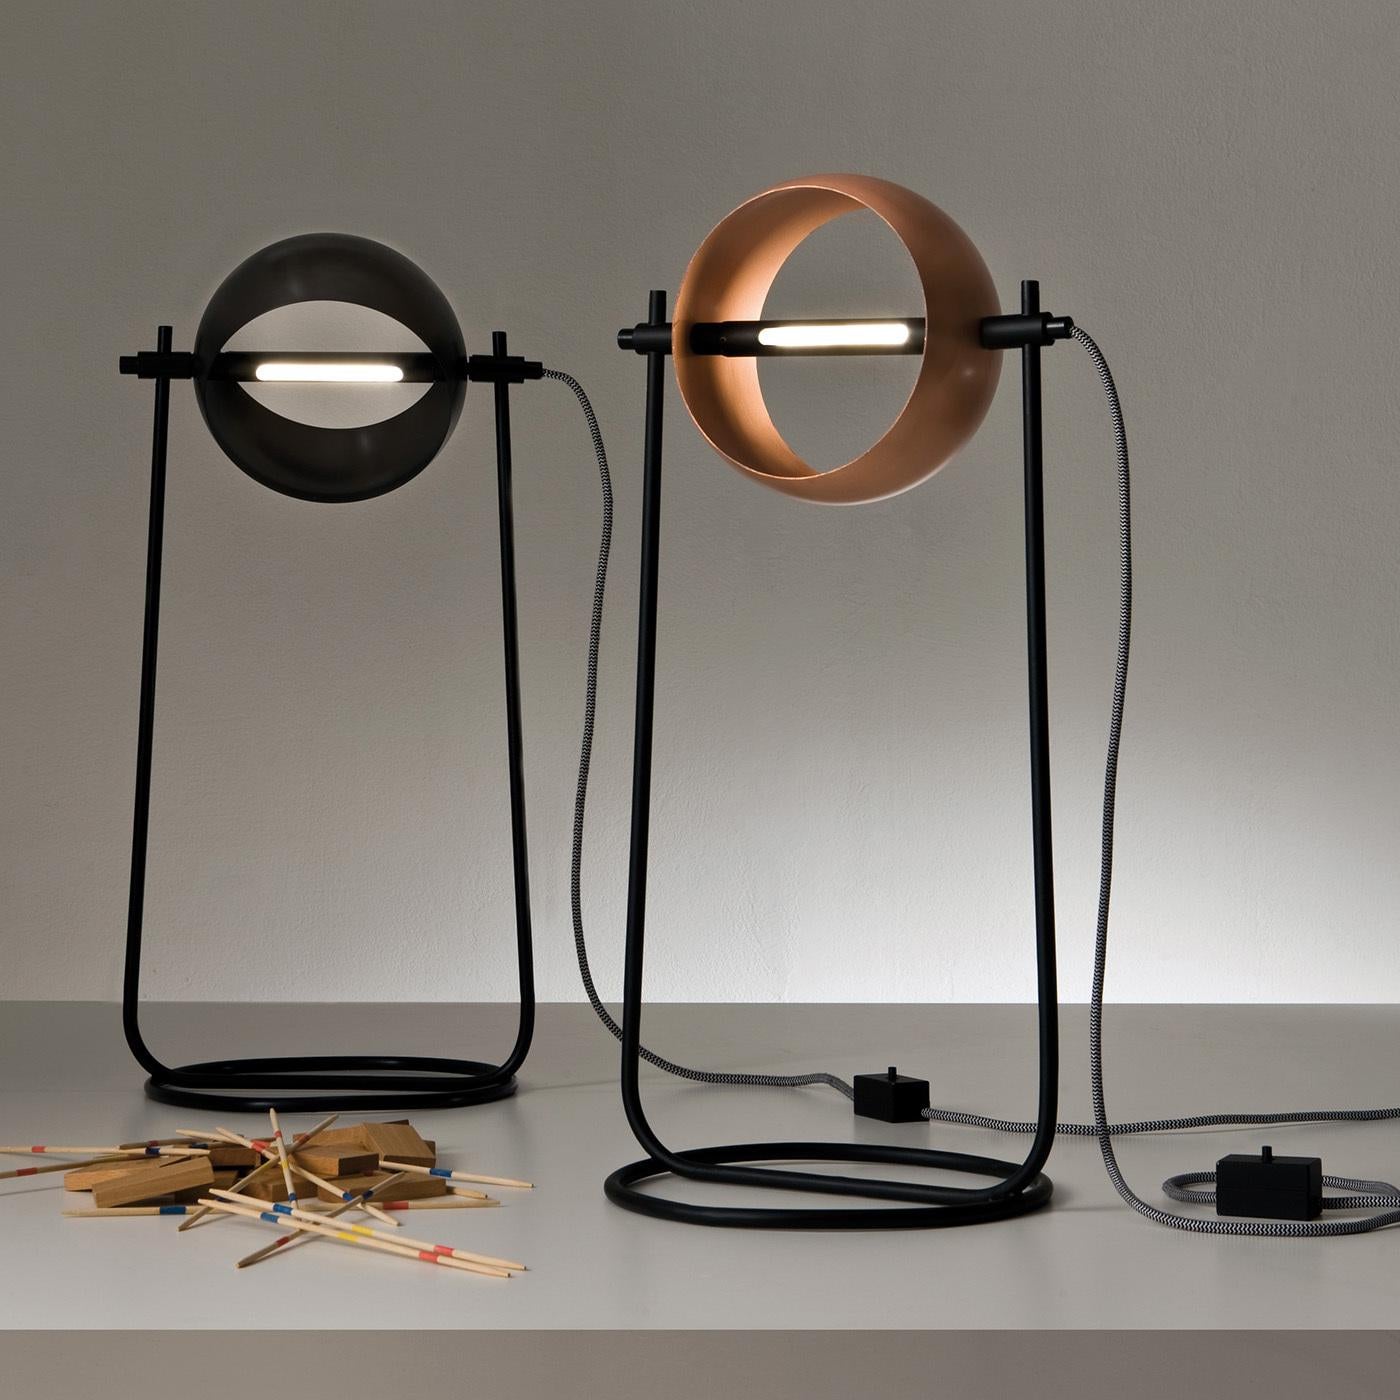 This smaller version of Colzani's striking Globe design features an original metal-crafting technique combined with a functional, central LED 3000K light strip and a superbly ingenious rotating lampshade. Featured with a black iron base and